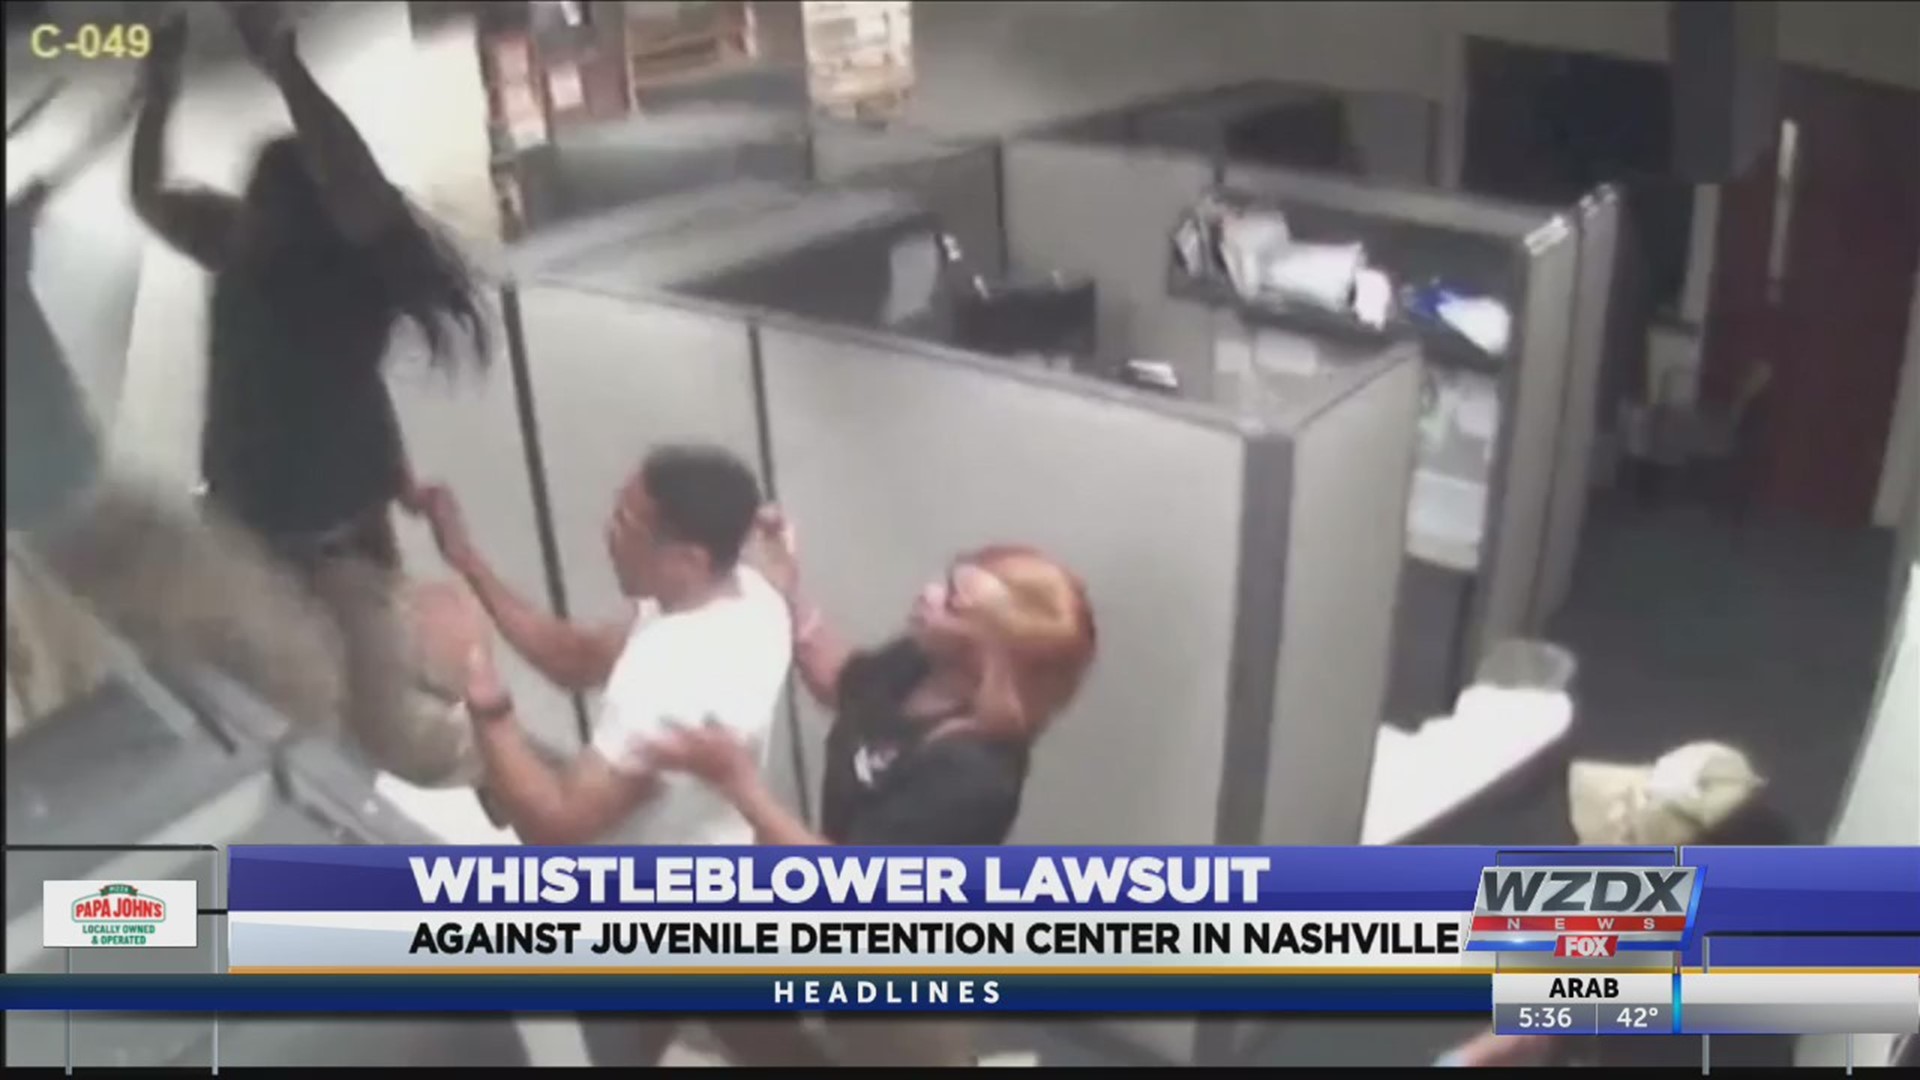 The Tennessee Juvenile Detention Center where four teenagers escaped last week is also the subject of a whistleblower lawsuit.